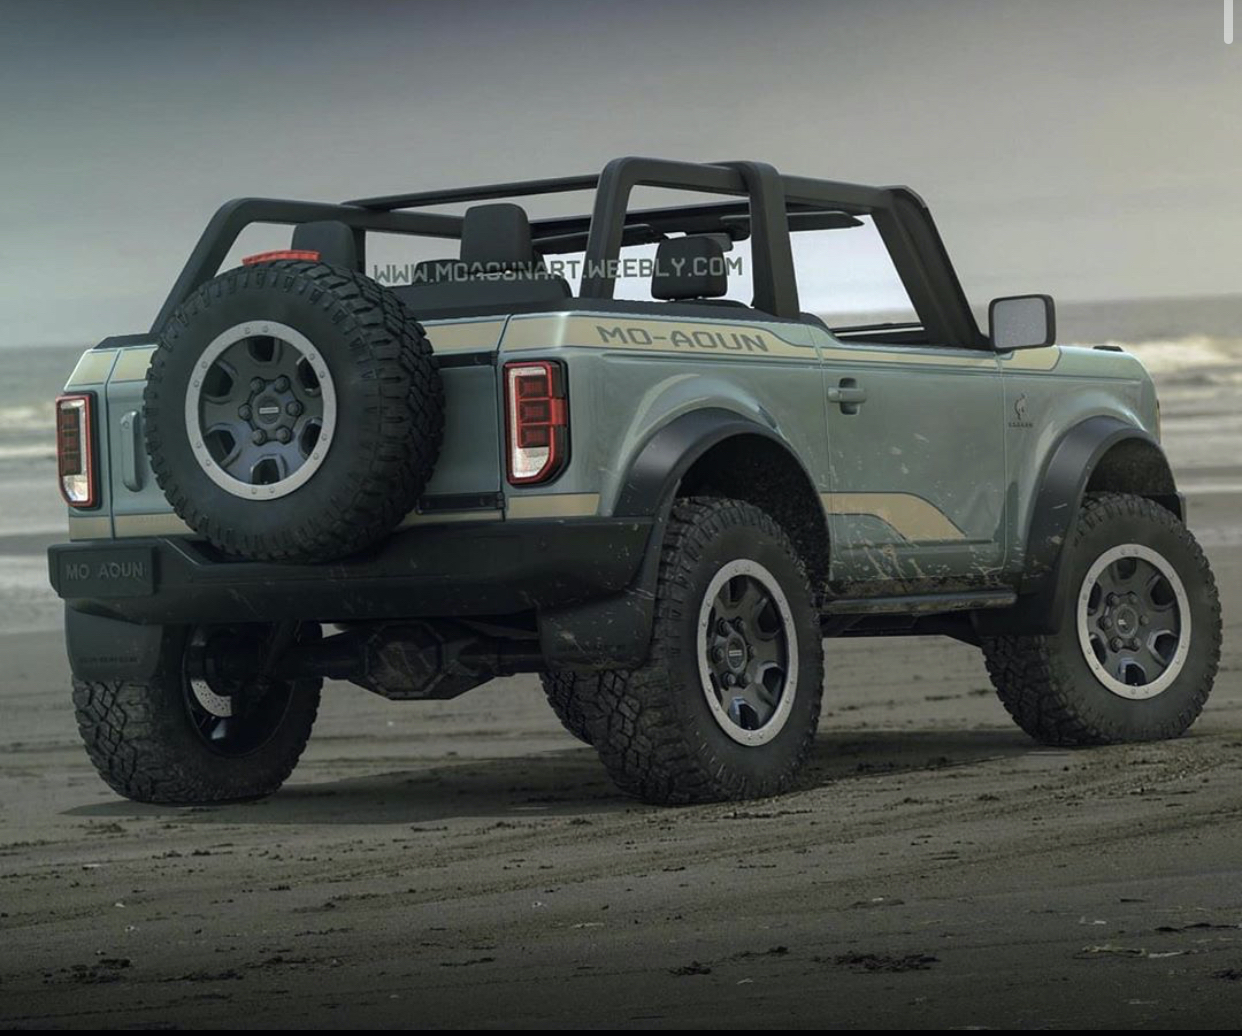 Ford Bronco just maybe..... closest 2 door Bronco render yet? E50D8EA7-4B81-4883-94BD-771DE5BFDD79